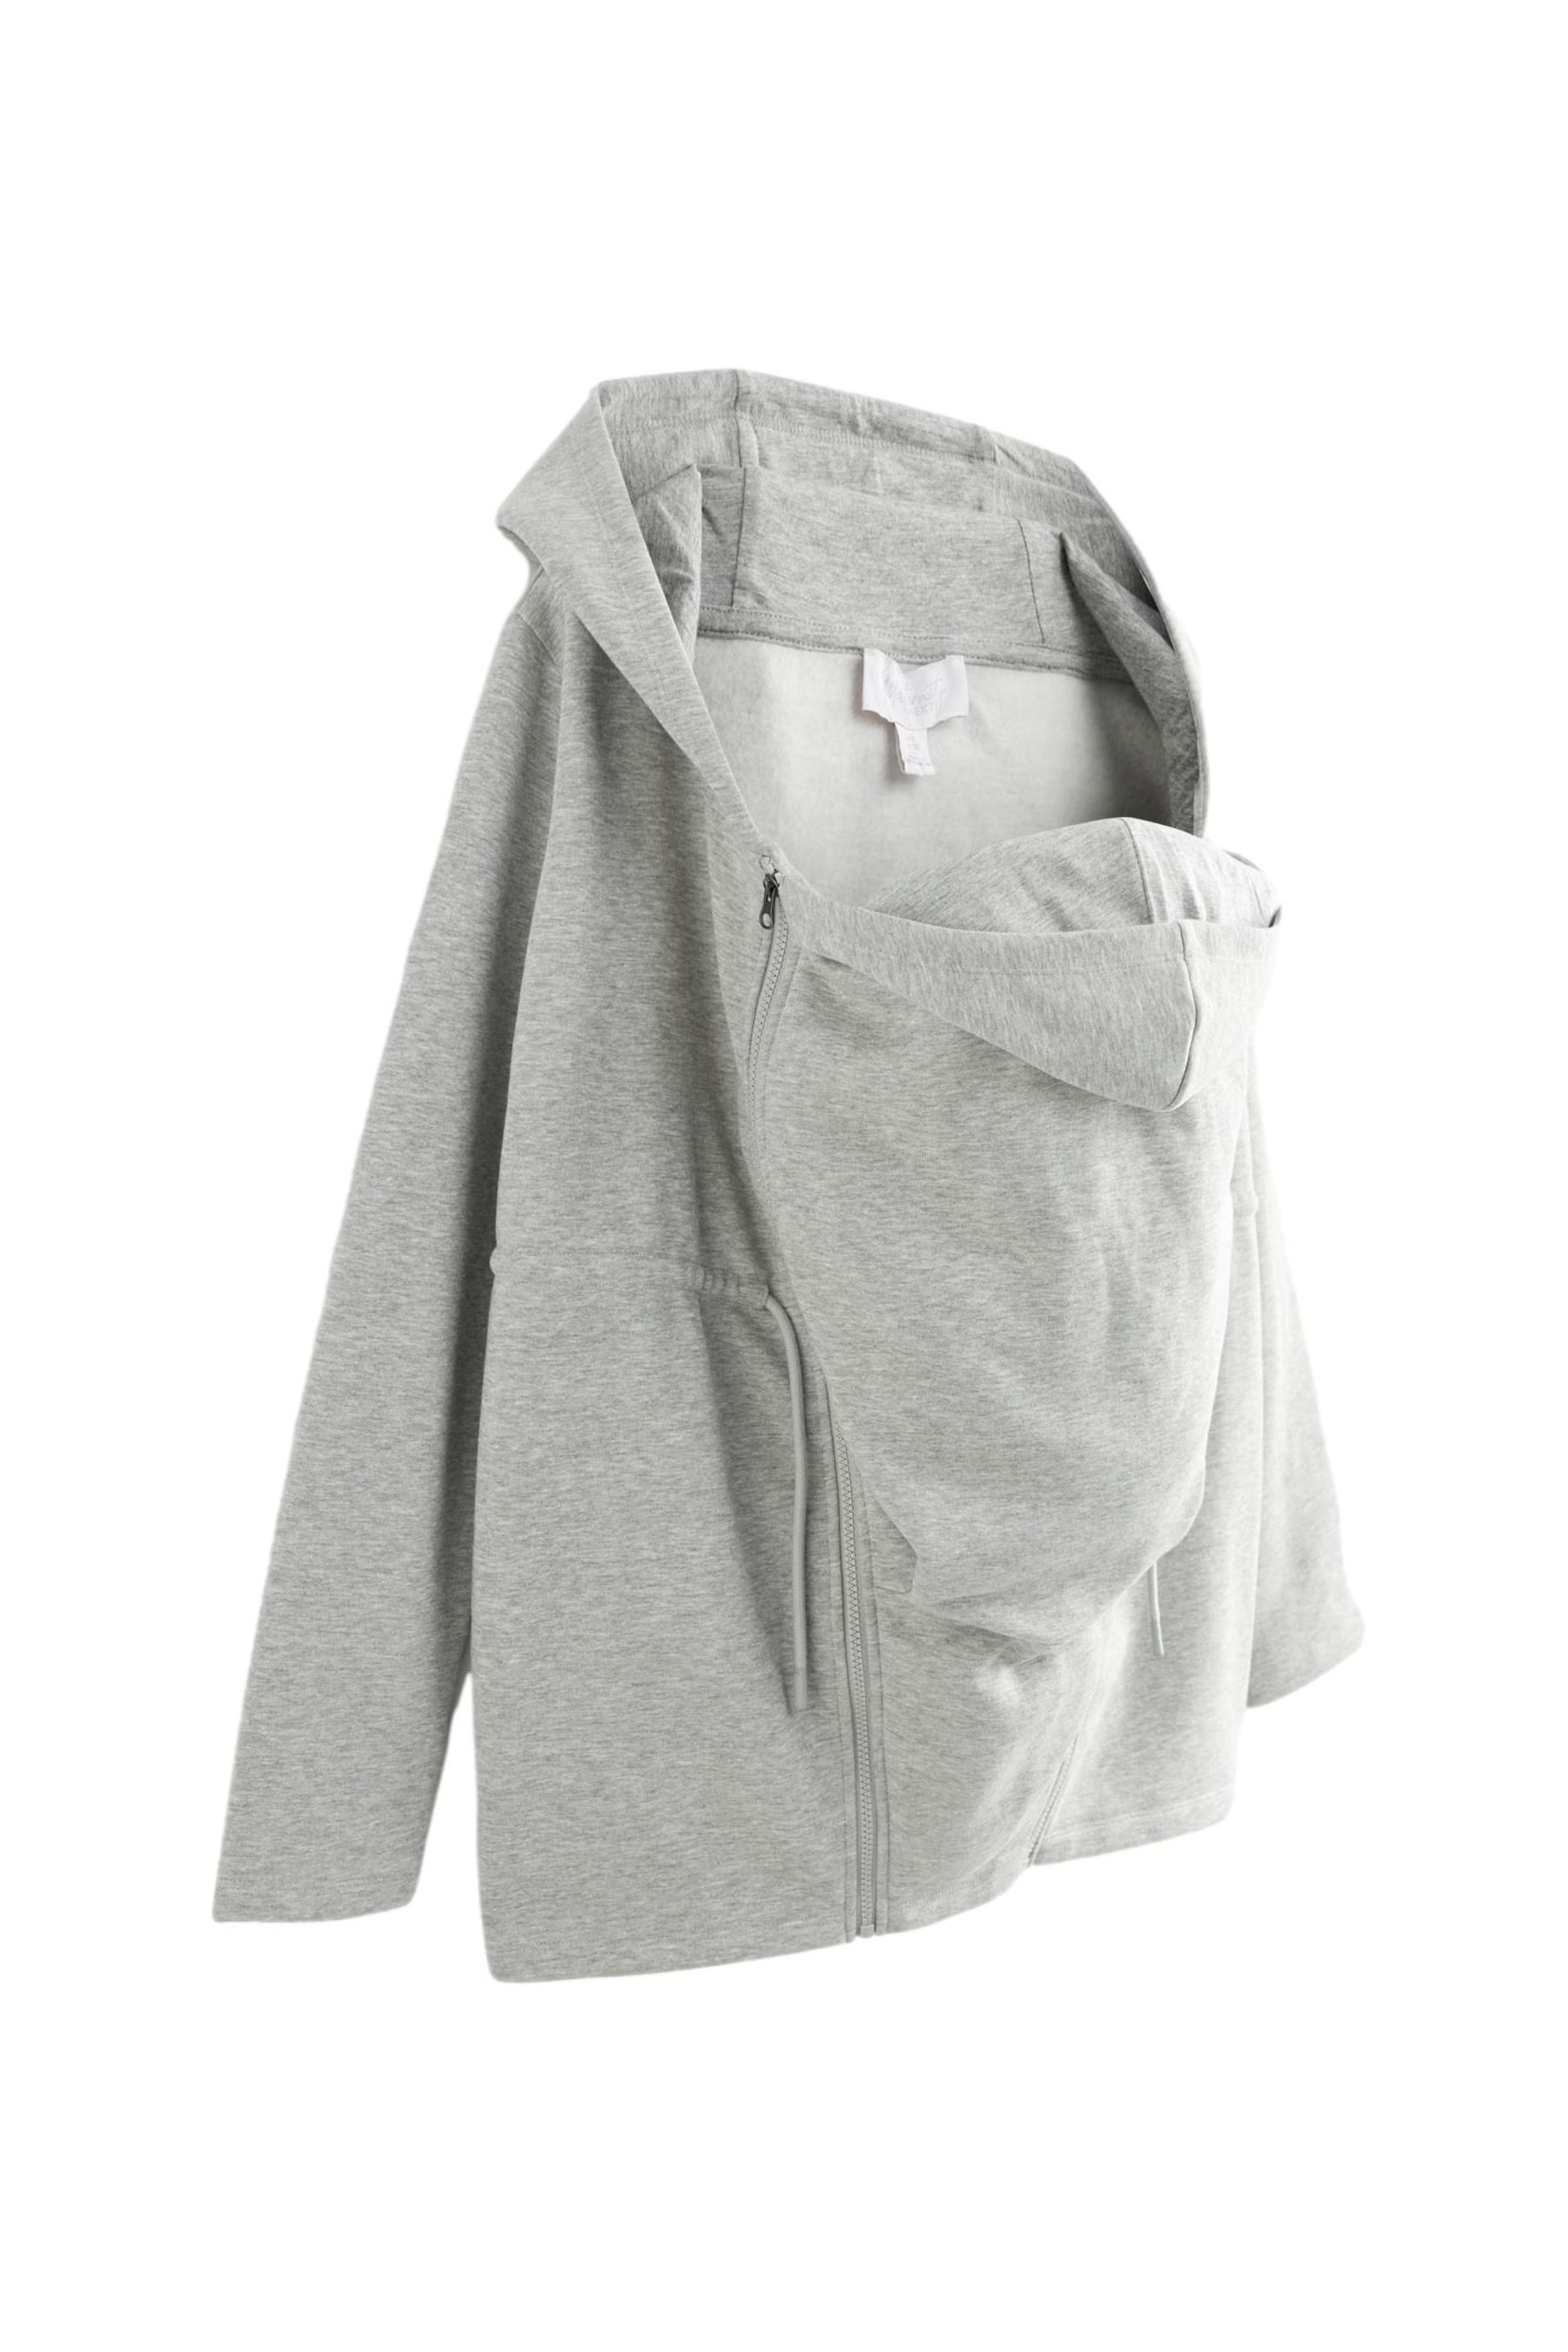 Grey Maternity 3-In-1 Hoodie with Baby Carrier Panel - Image 8 of 9